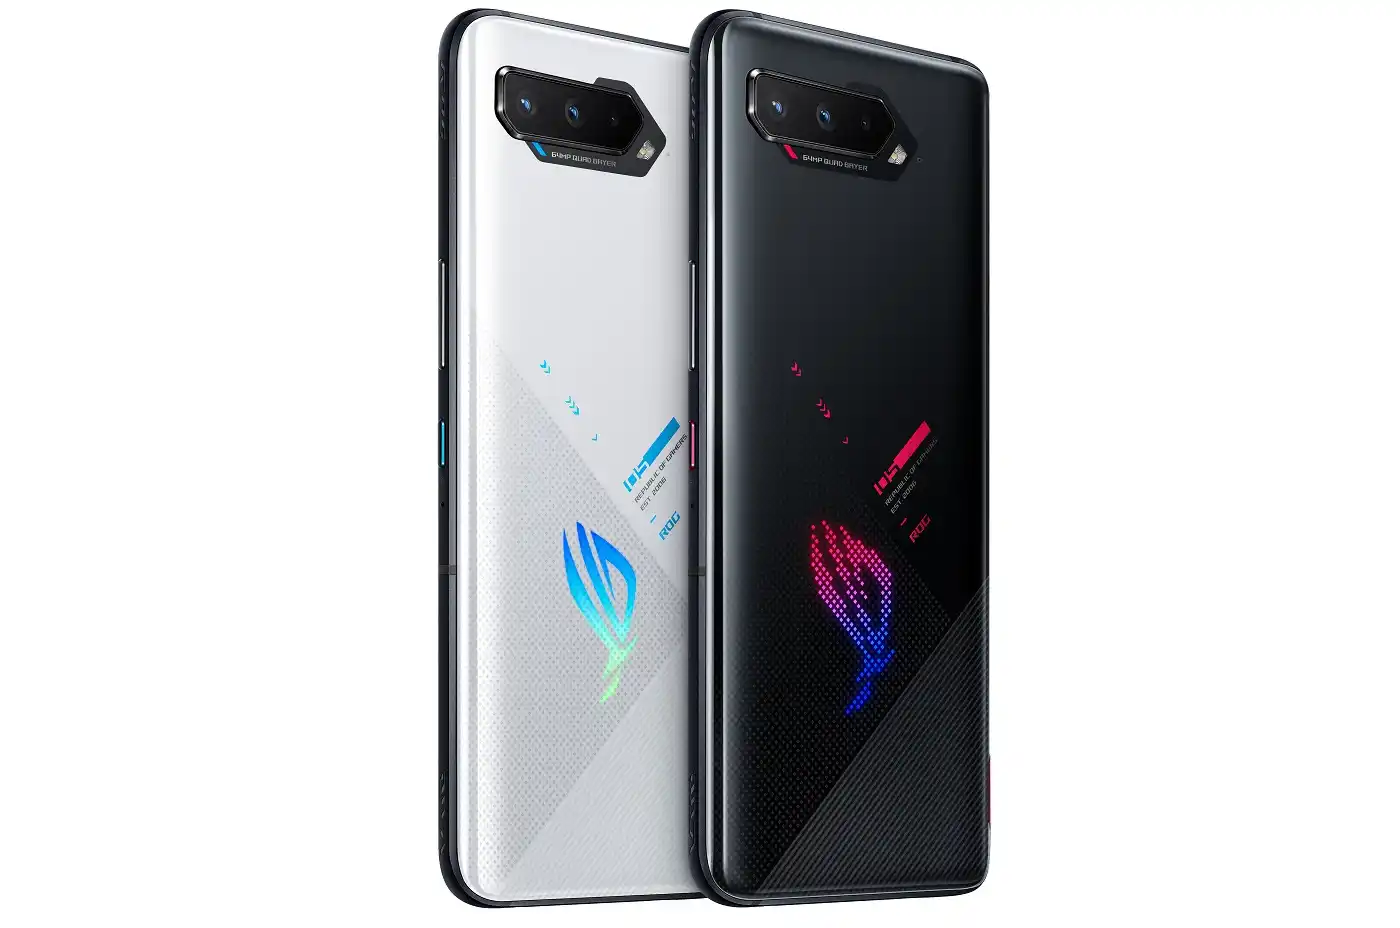 Asus Rog Phone 5 series with Snapdragon 888, 144Hz fast refresh rate launched: Price, Specifications